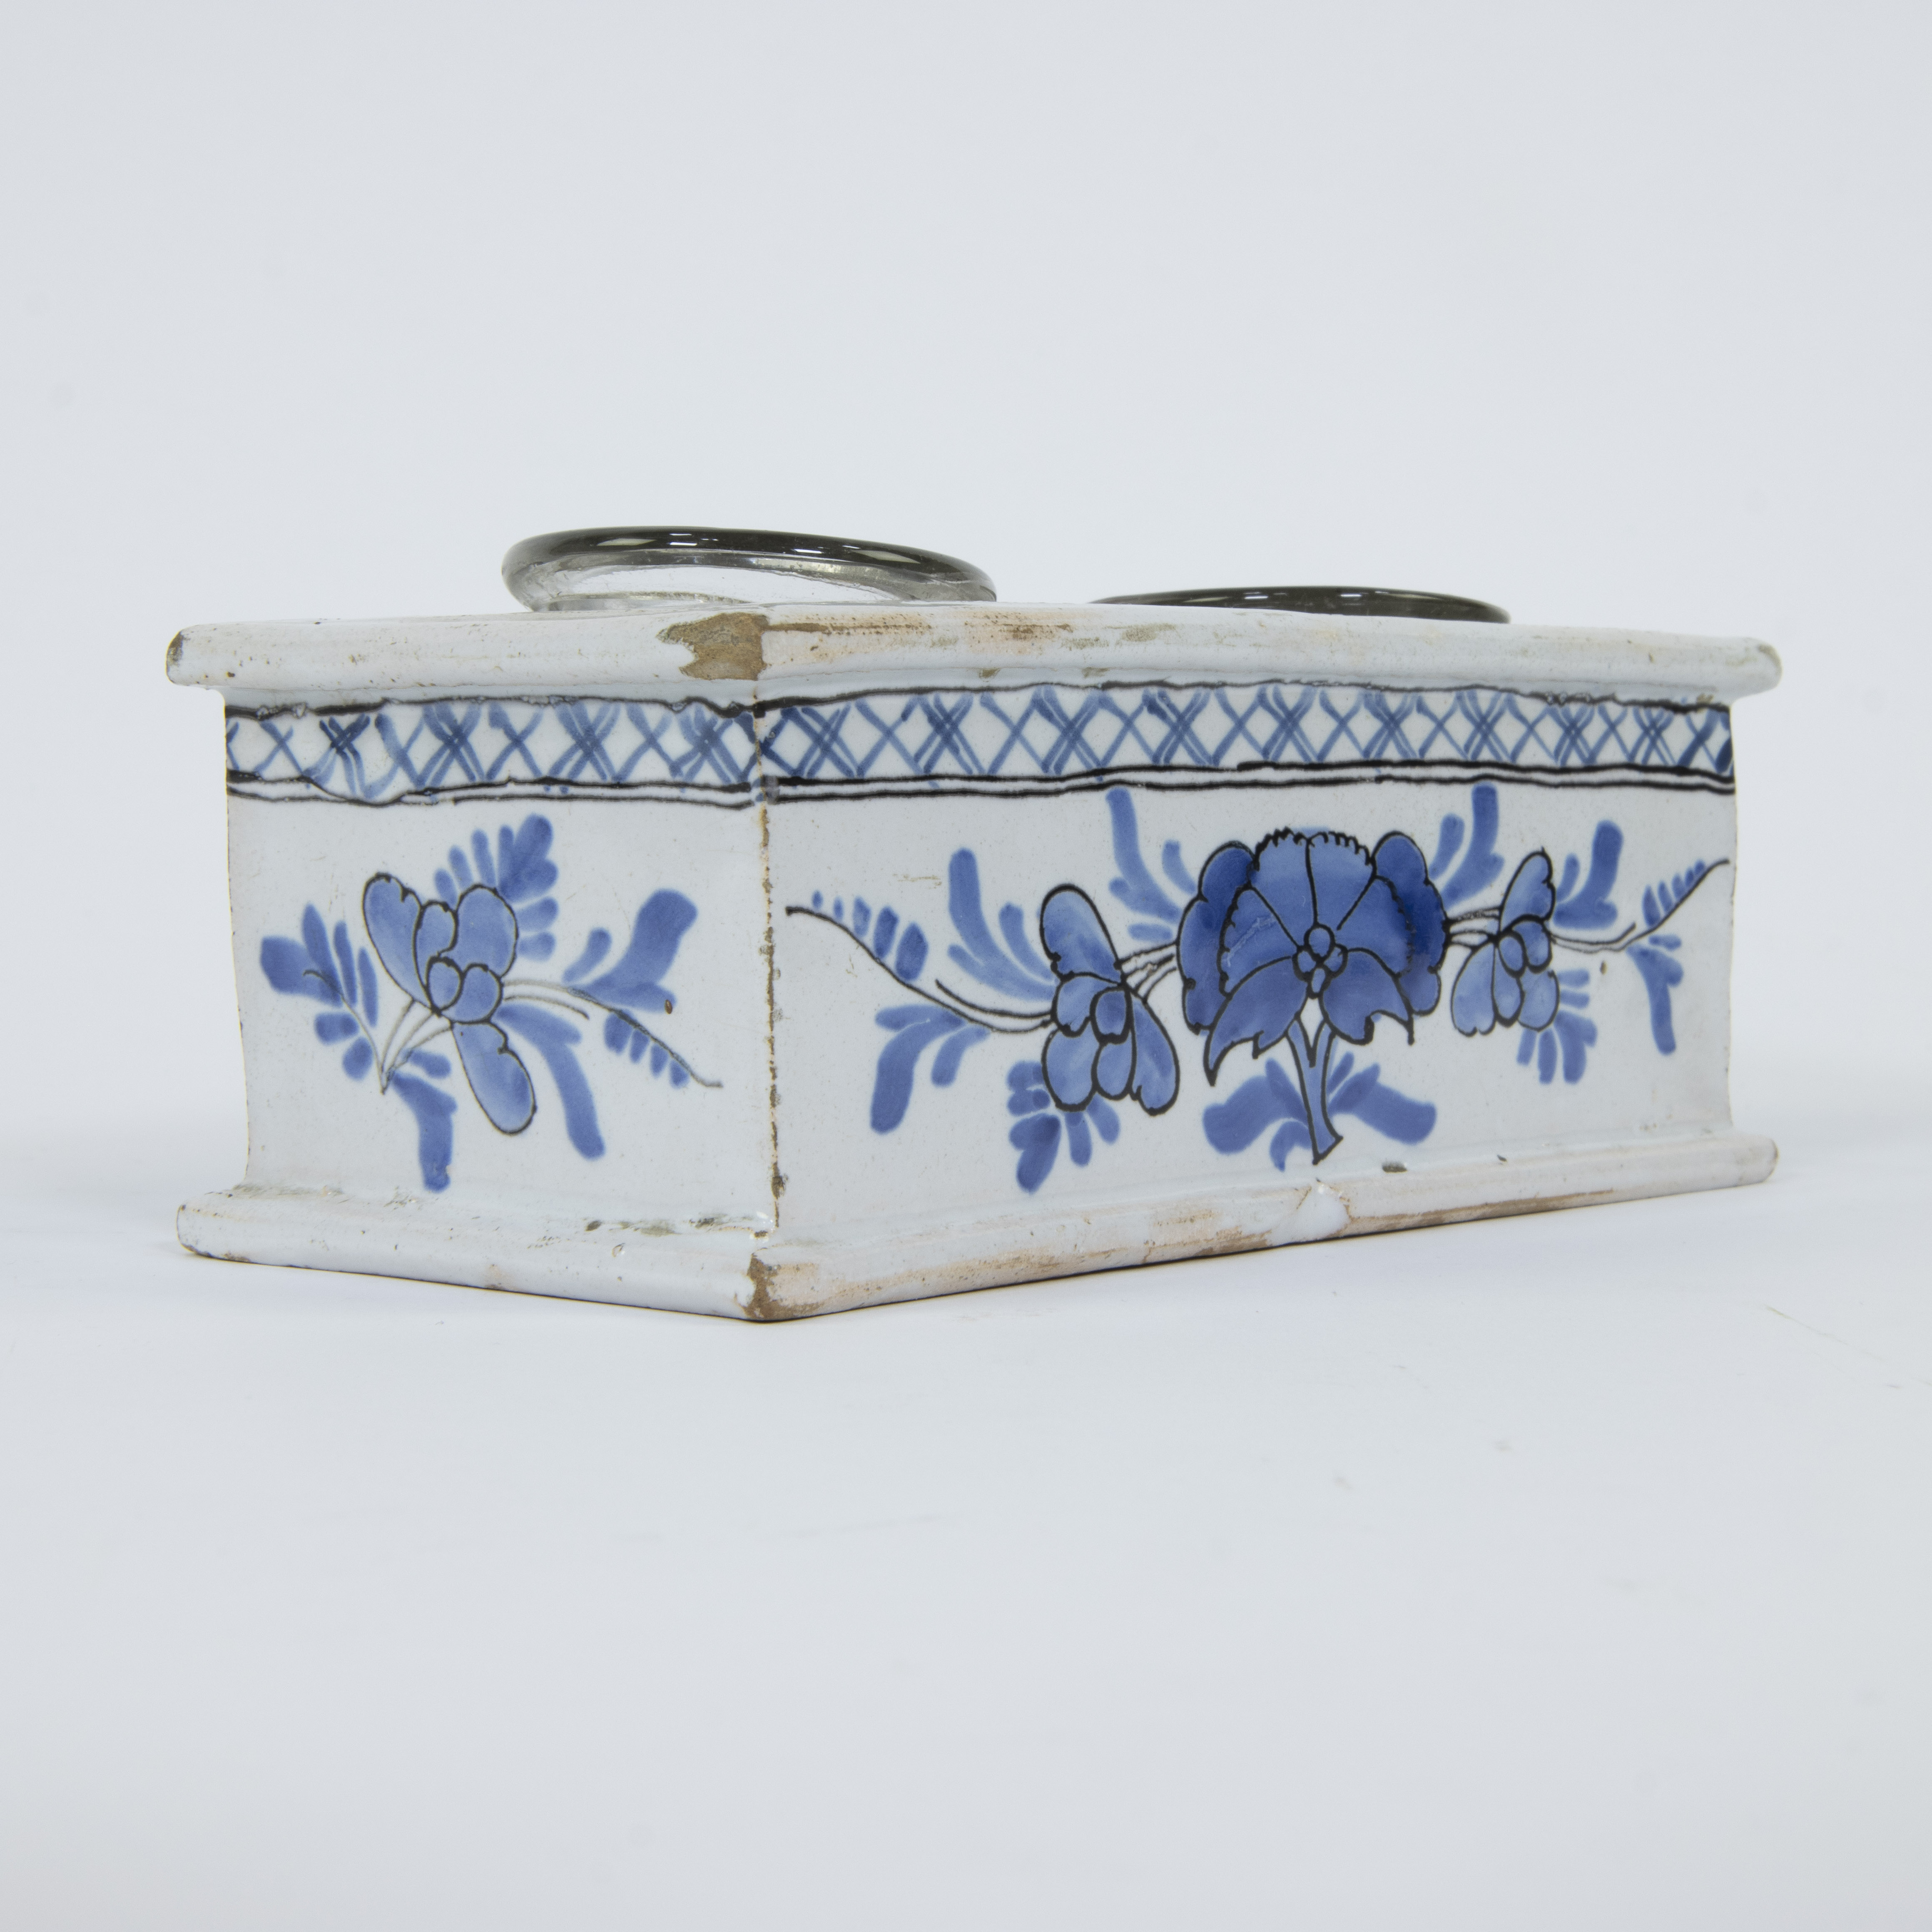 2 Delft tiles and an inkwell, 18th century - Image 5 of 6